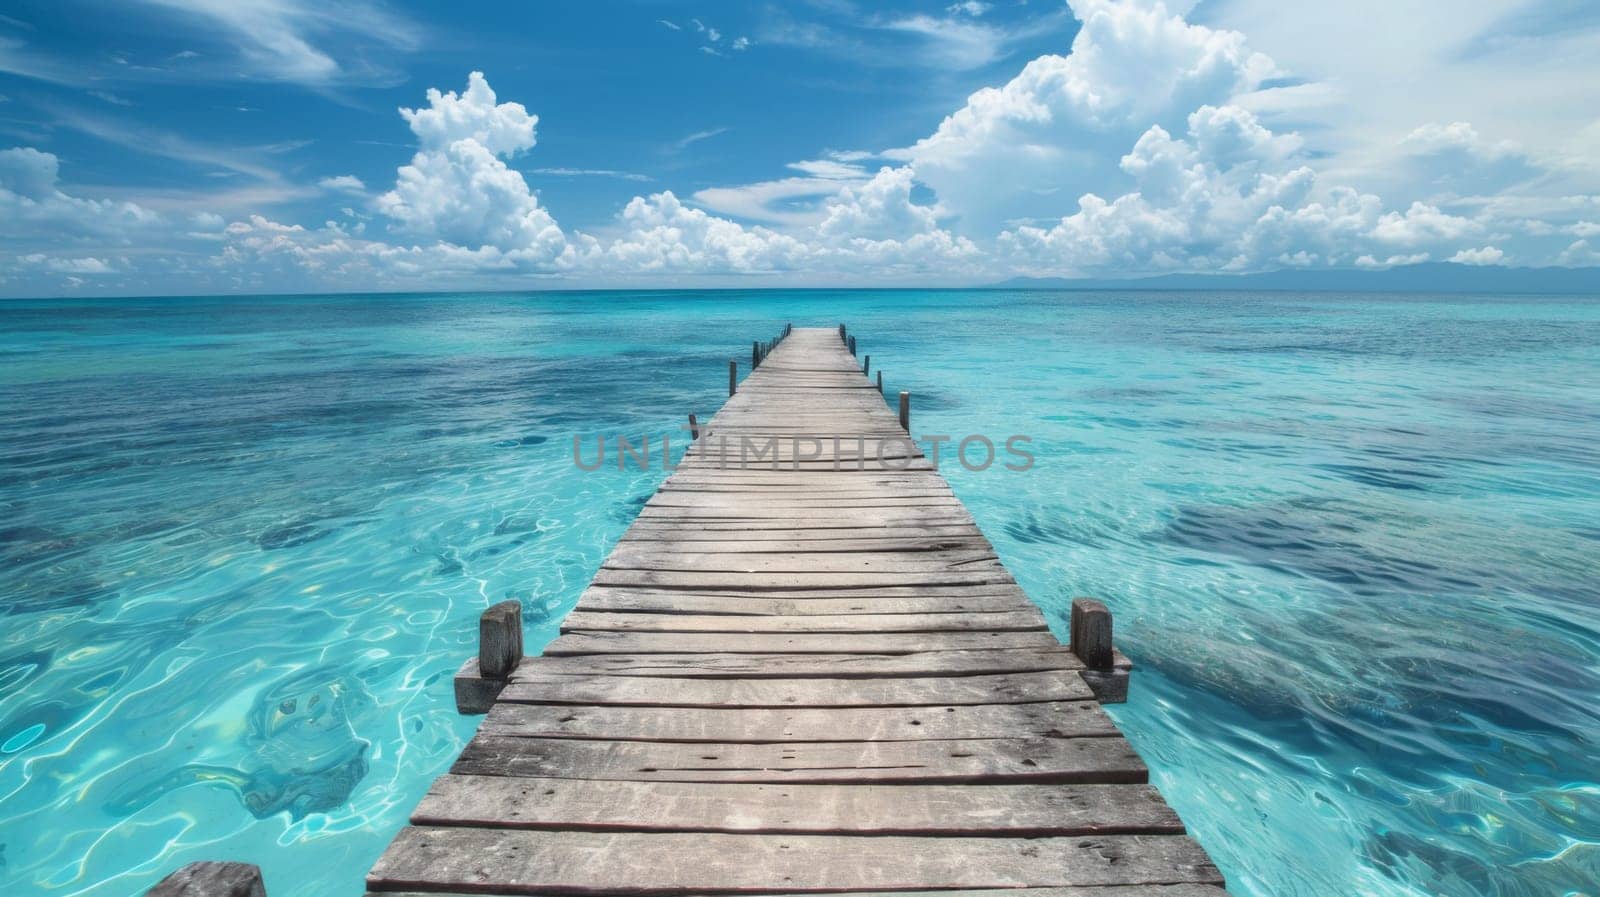 A wooden pier leading into the ocean with clouds in the sky